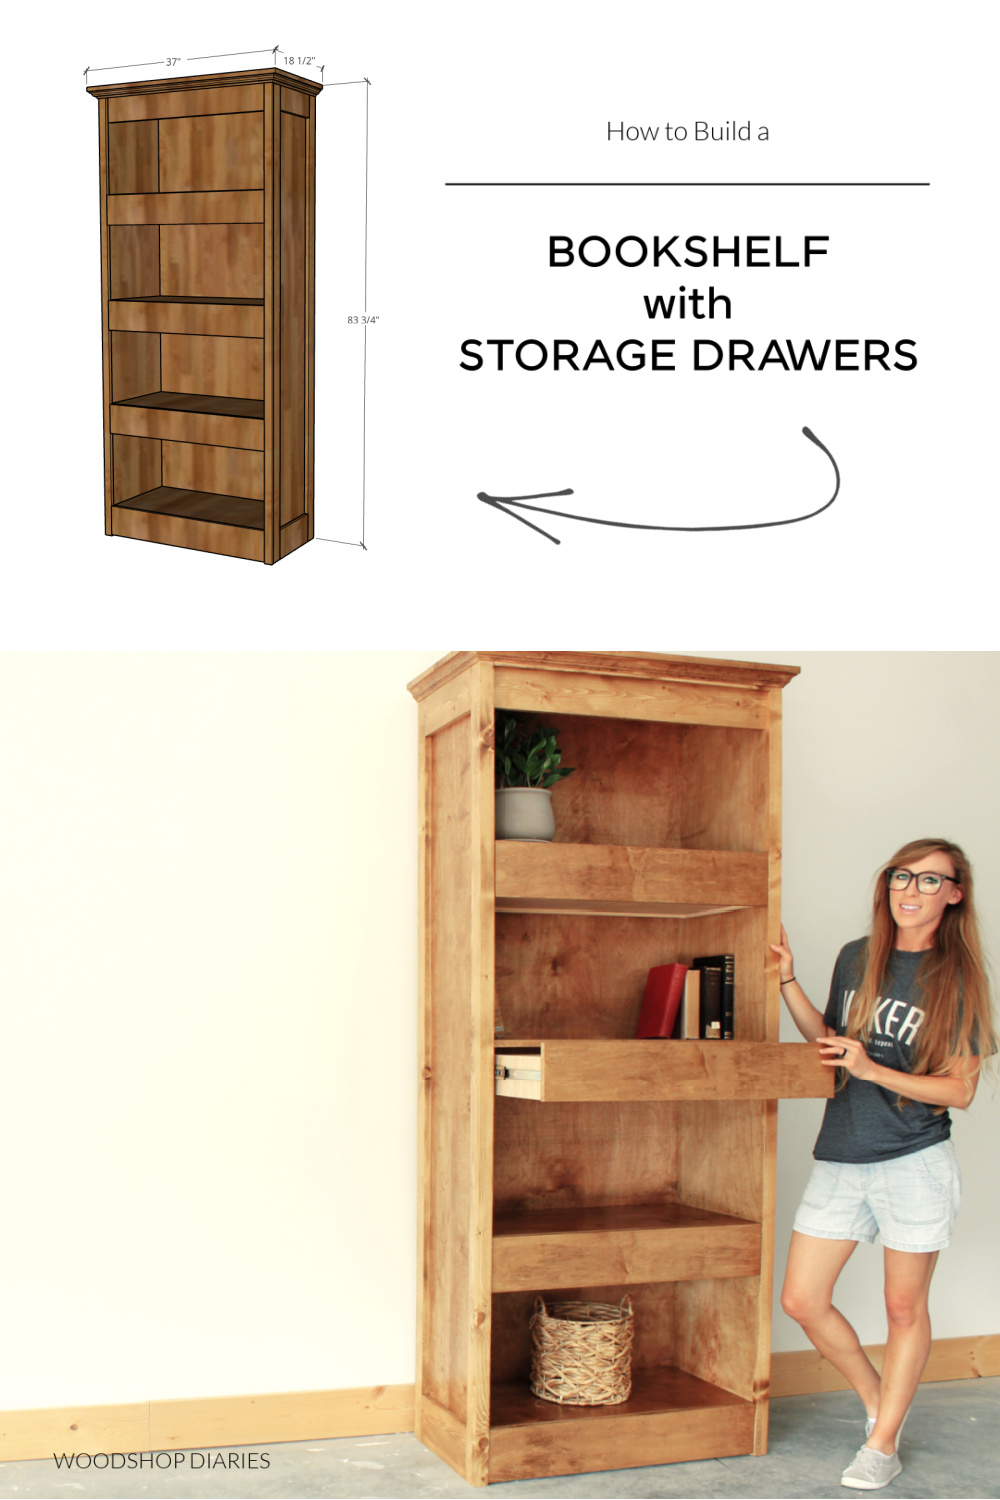 Pinterest collage image showing overall dimensional diagram at top and Shara opening drawers on bookshelf at bottom with text "how to build a bookshelf with storage drawers"